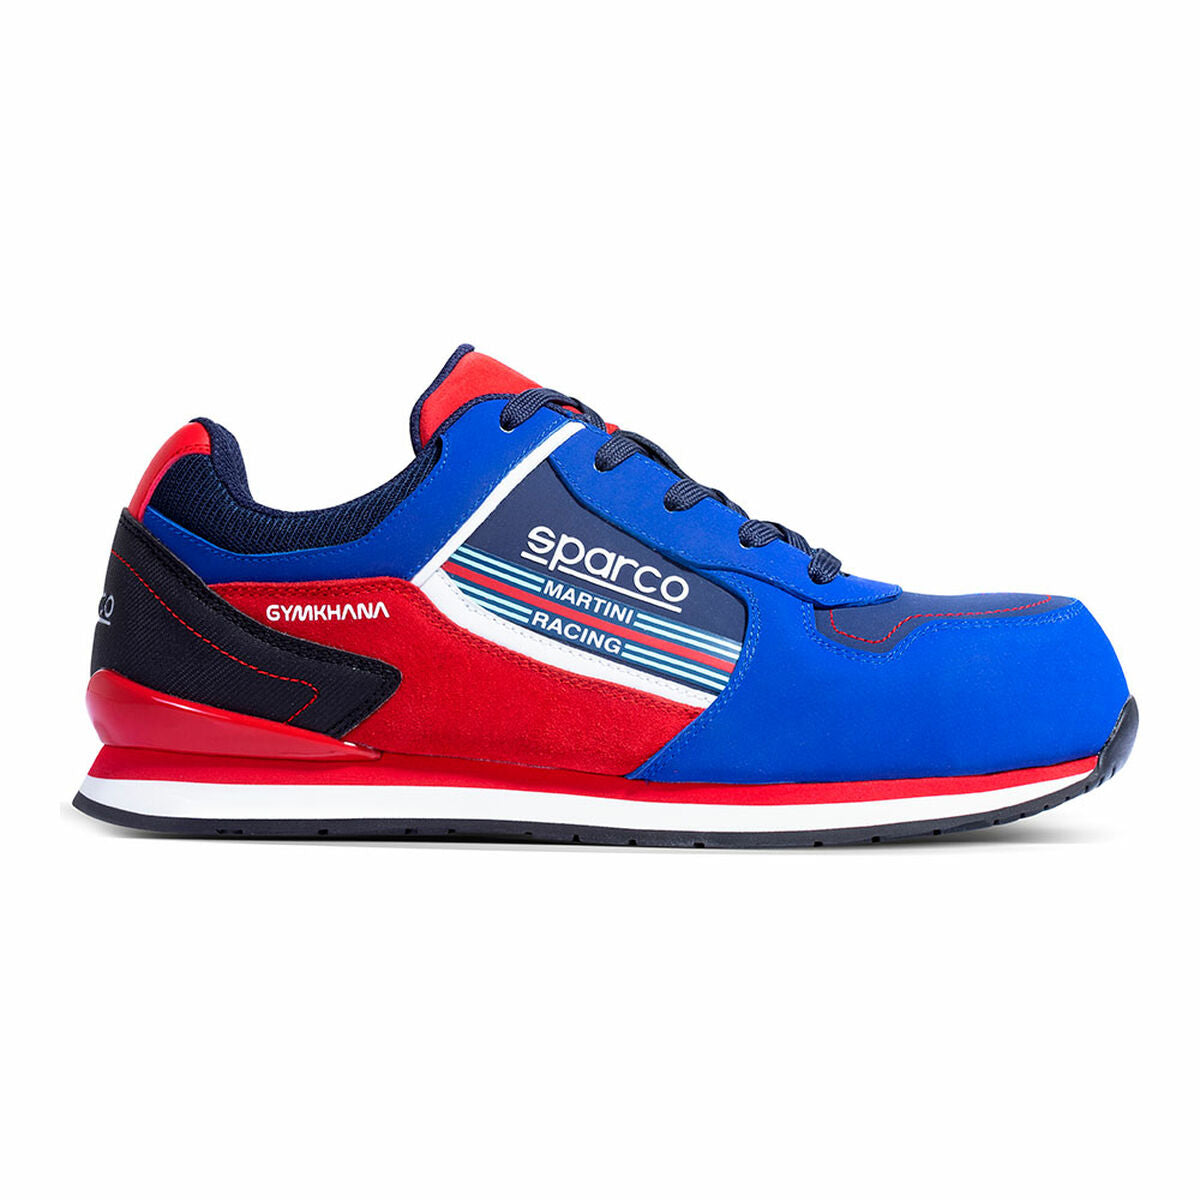 Safety shoes Sparco Ndis Scarpa Gymkhana Martini Racing S3 ESD Blue Red